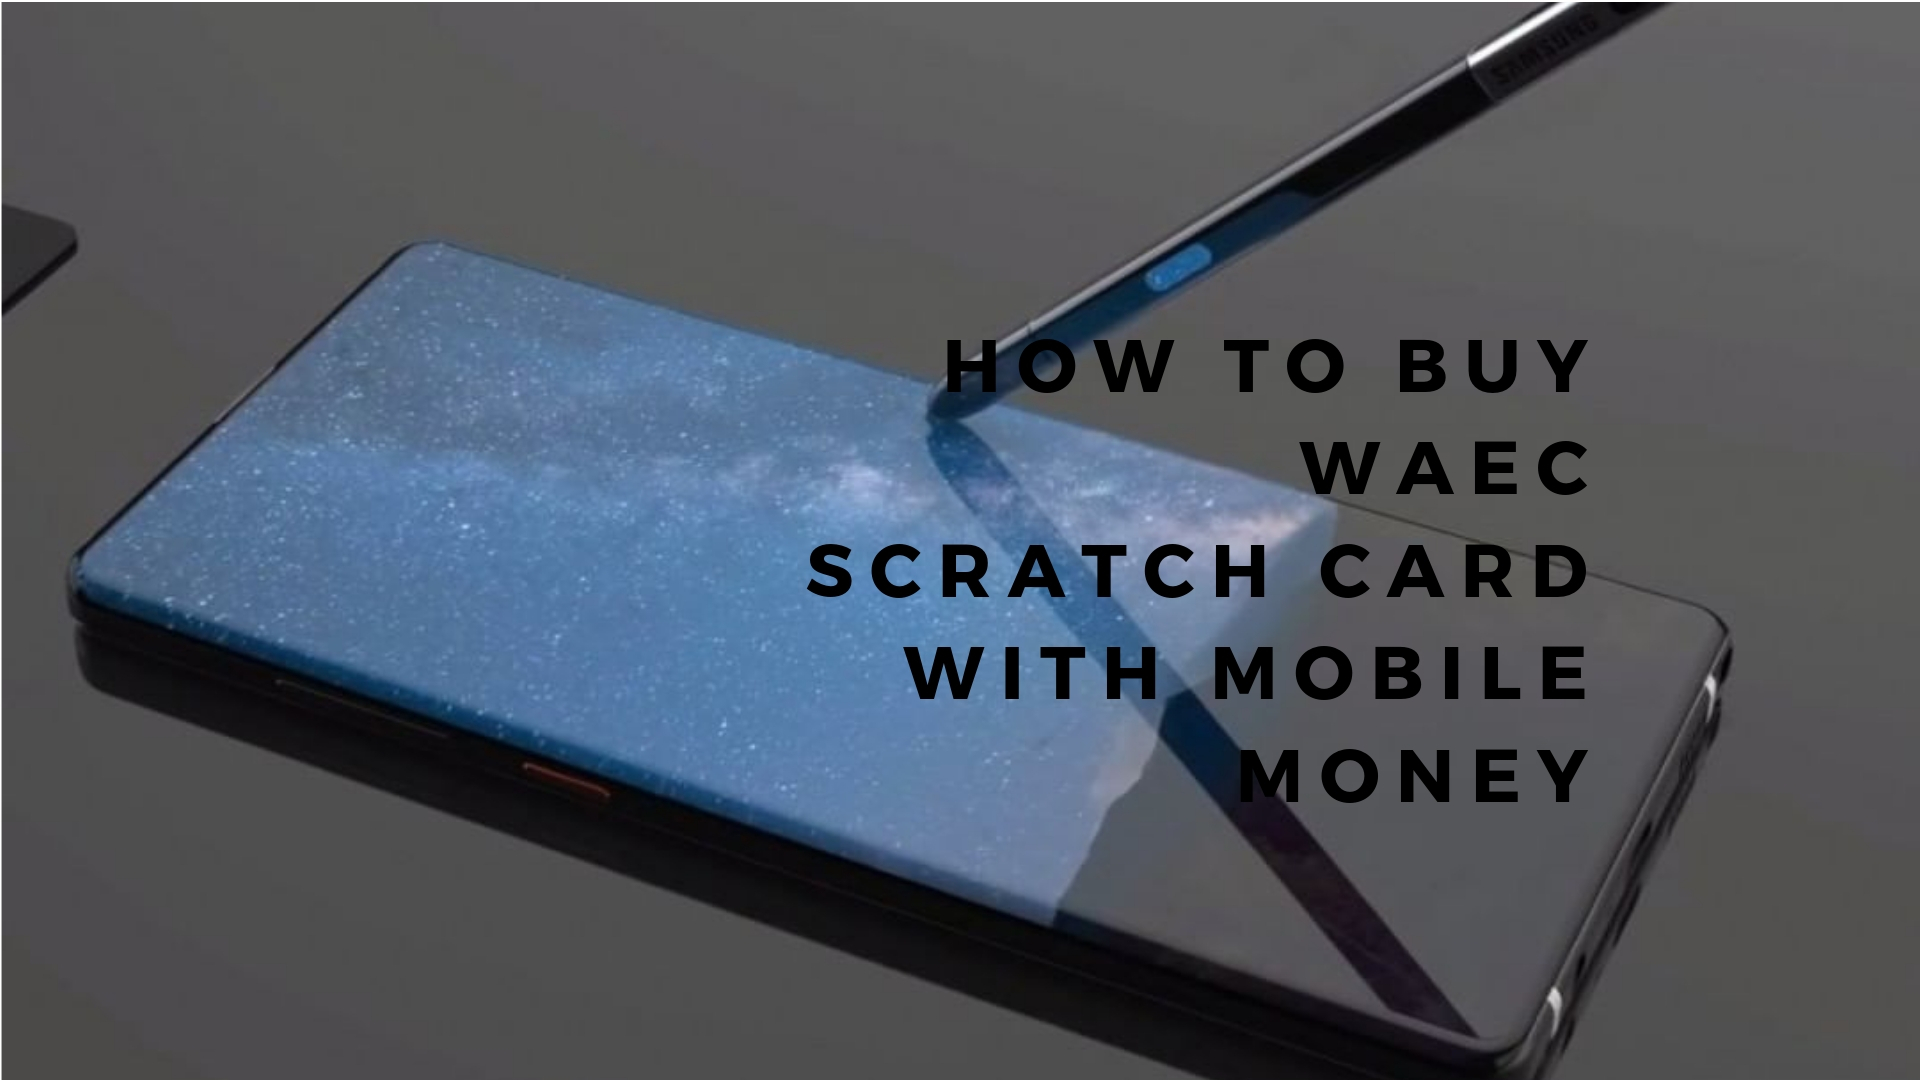 All you need to know on how to buy WAEC scratch card with mobile money